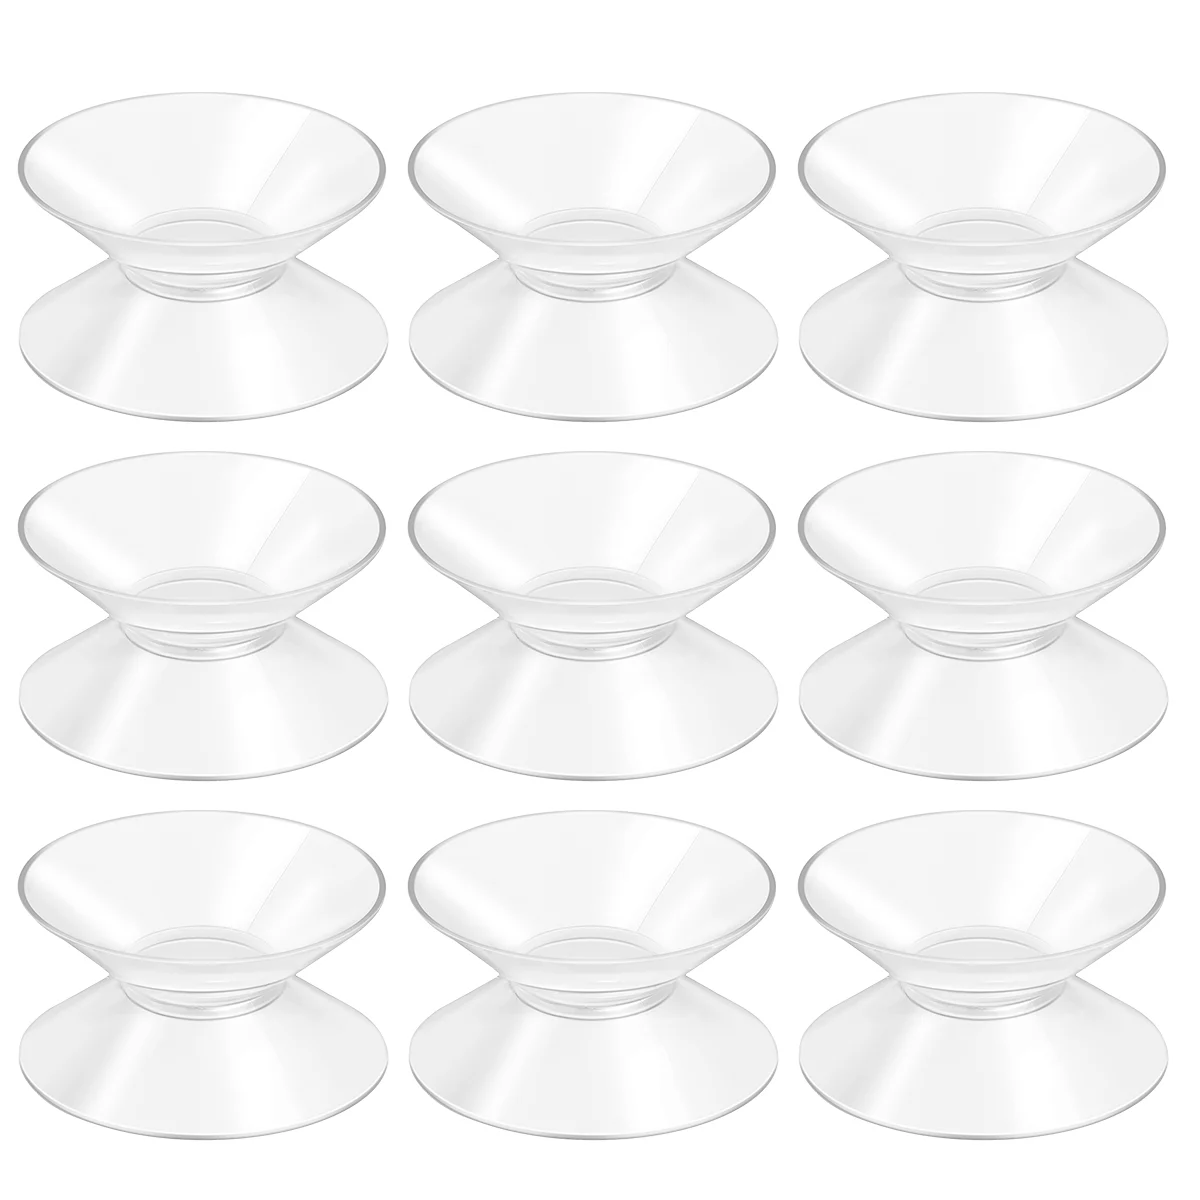 

BESTOMZ Double Sided Suction Cup 30mm Plastic Small Suction Cups Aquarium Oxygen Tube Fixed Sucker Pads For Glass Plastic